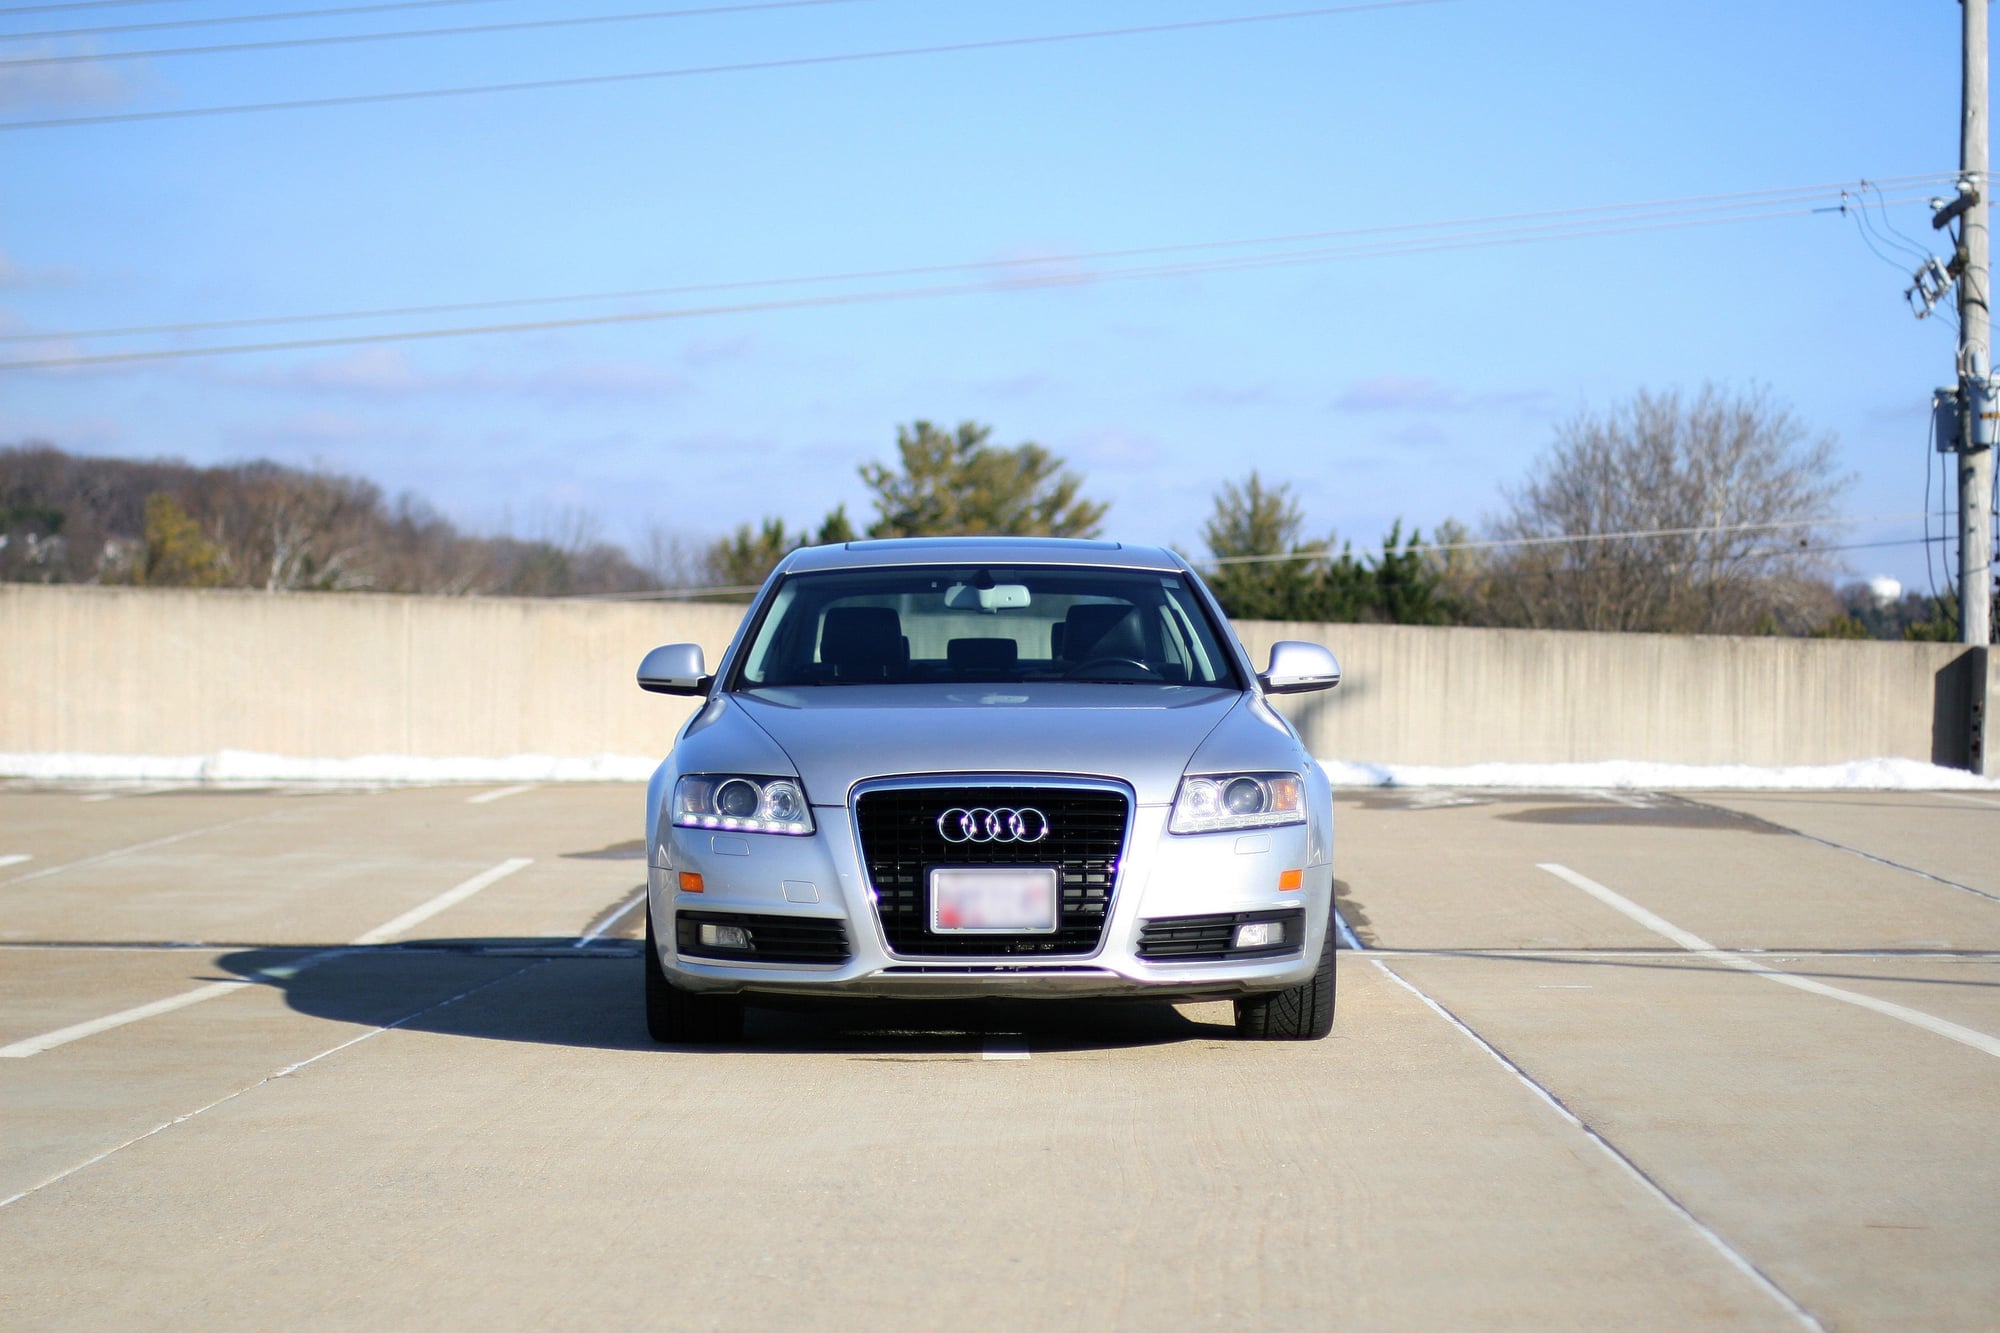 2010 Audi A6 Quattro - A6 3.0T Quattro Prestige Sport Package - Used - VIN WAUKGAFB1AN052810 - 144,000 Miles - 6 cyl - 4WD - Automatic - Sedan - Silver - Hunt Valley, MD 21030, United States